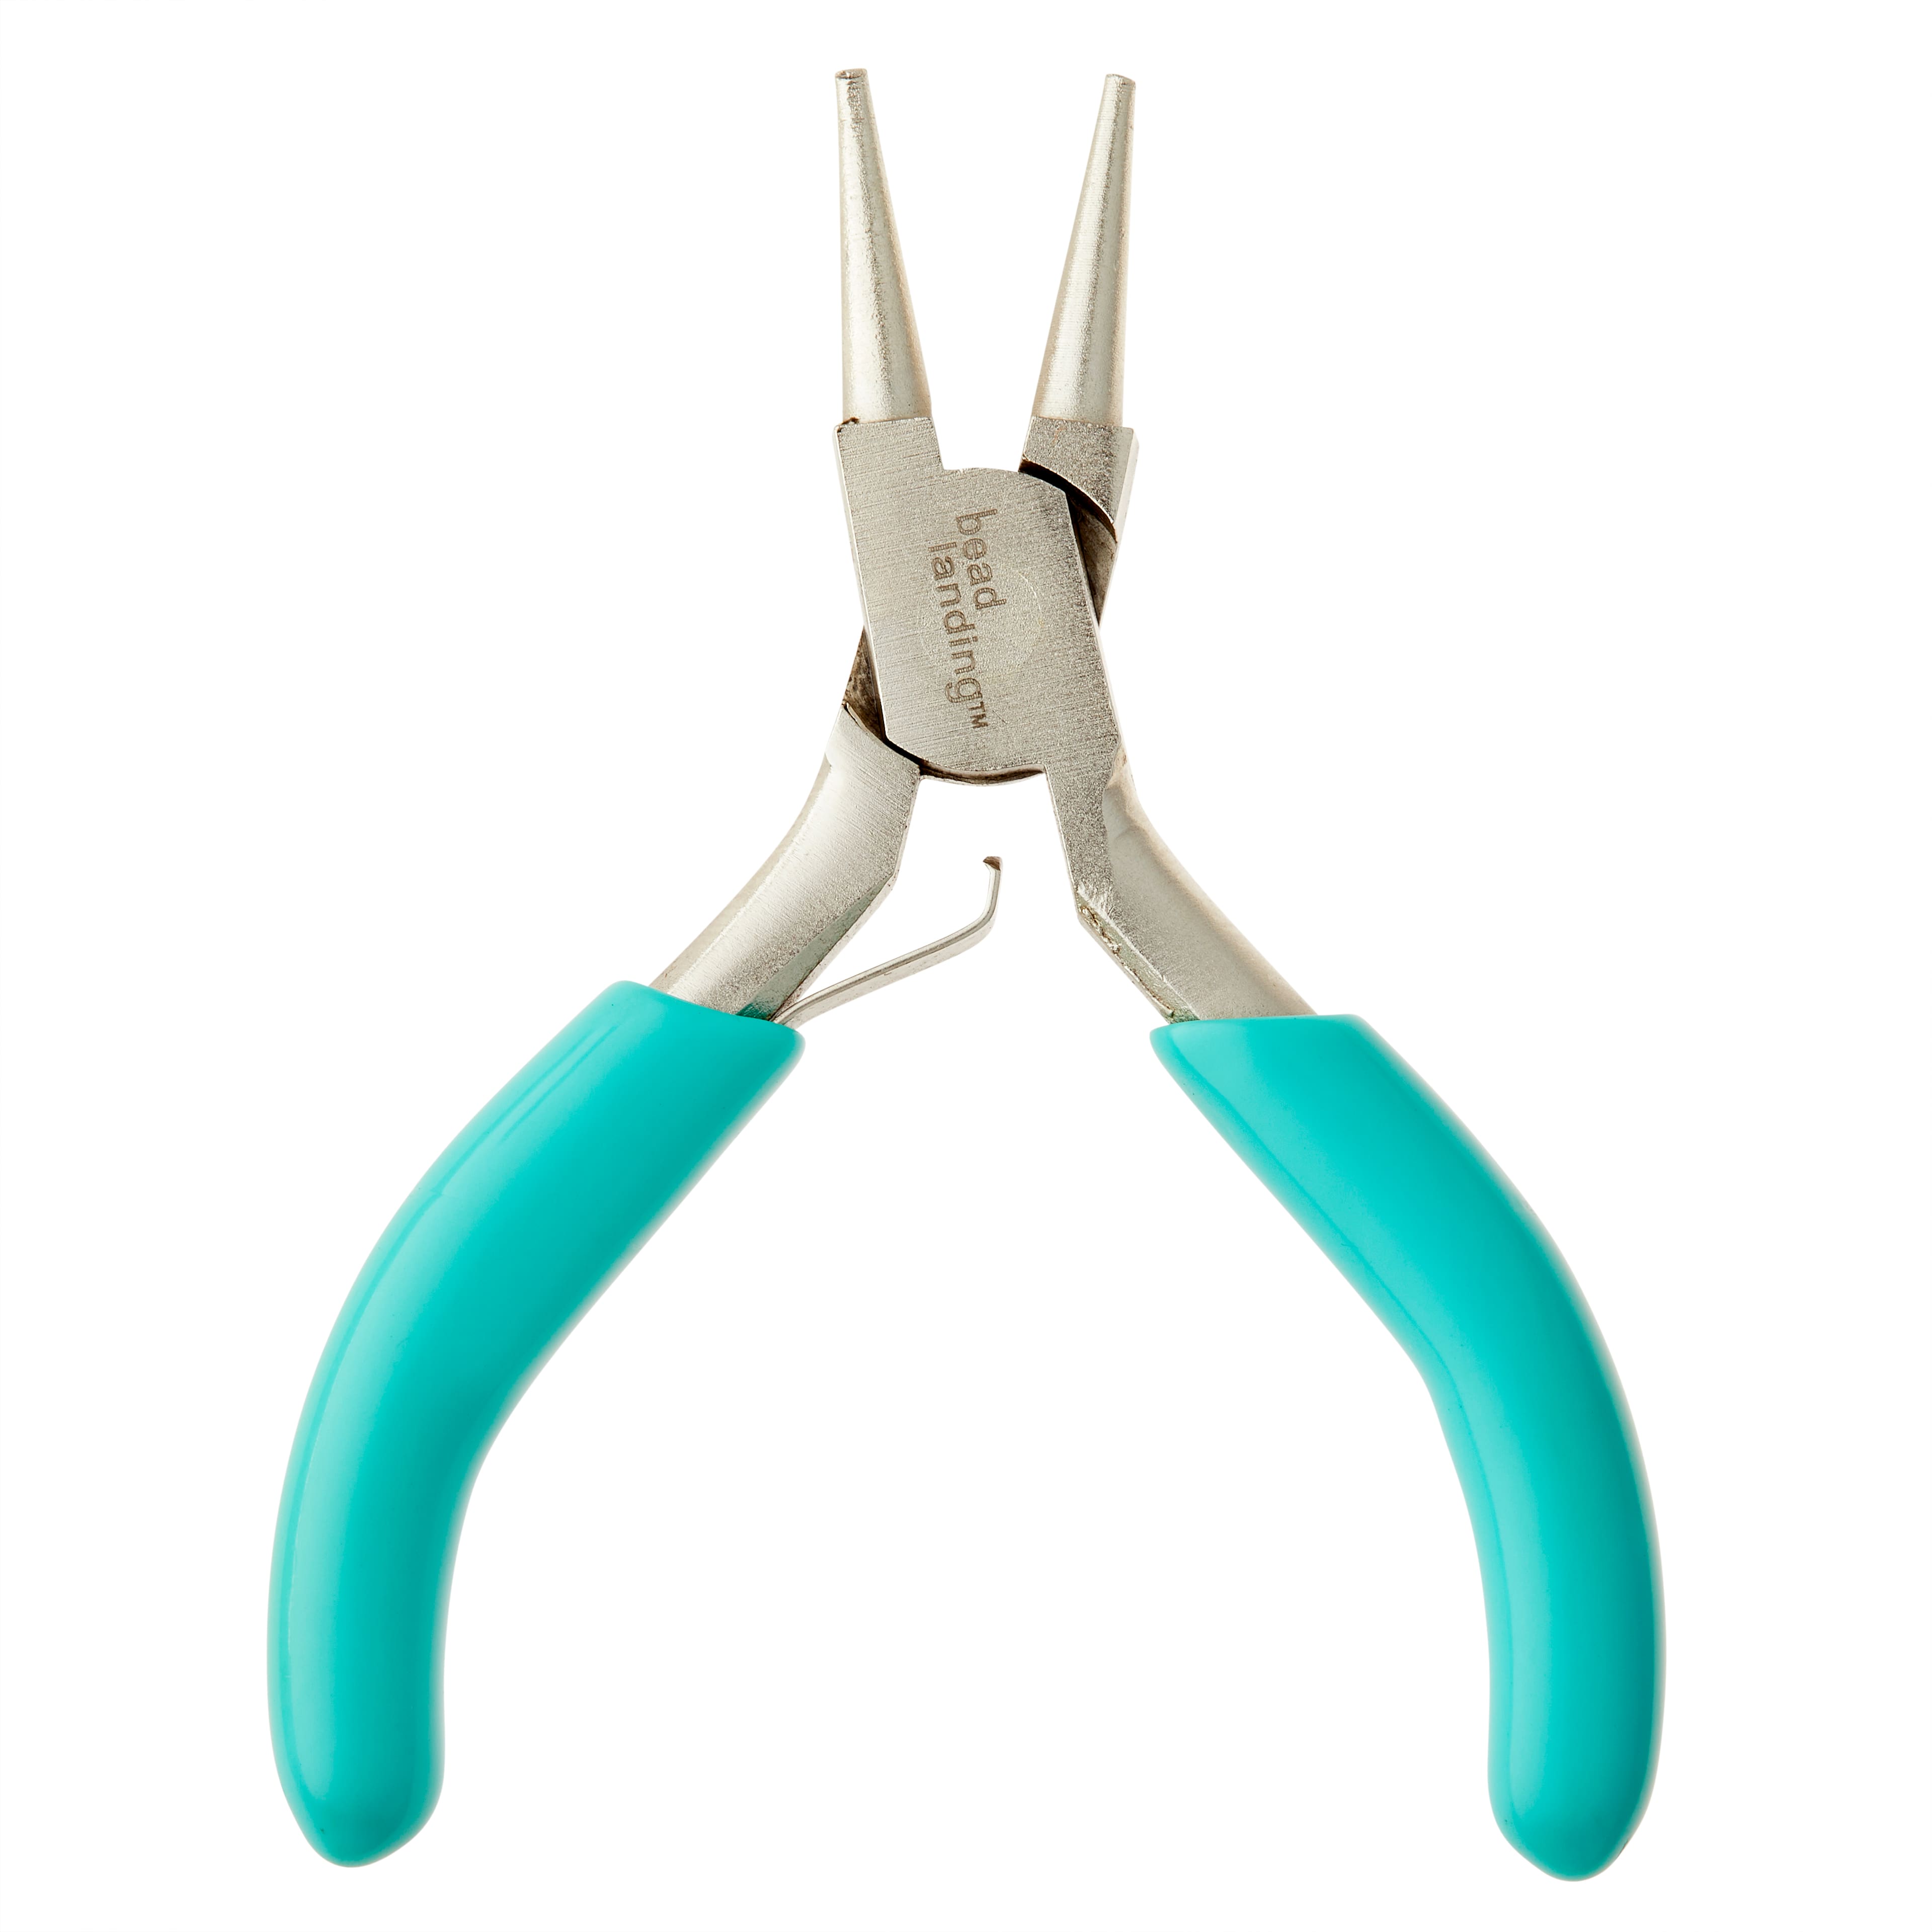 Wholesale Iron Jewelry Tool Sets: Round Nose Pliers 